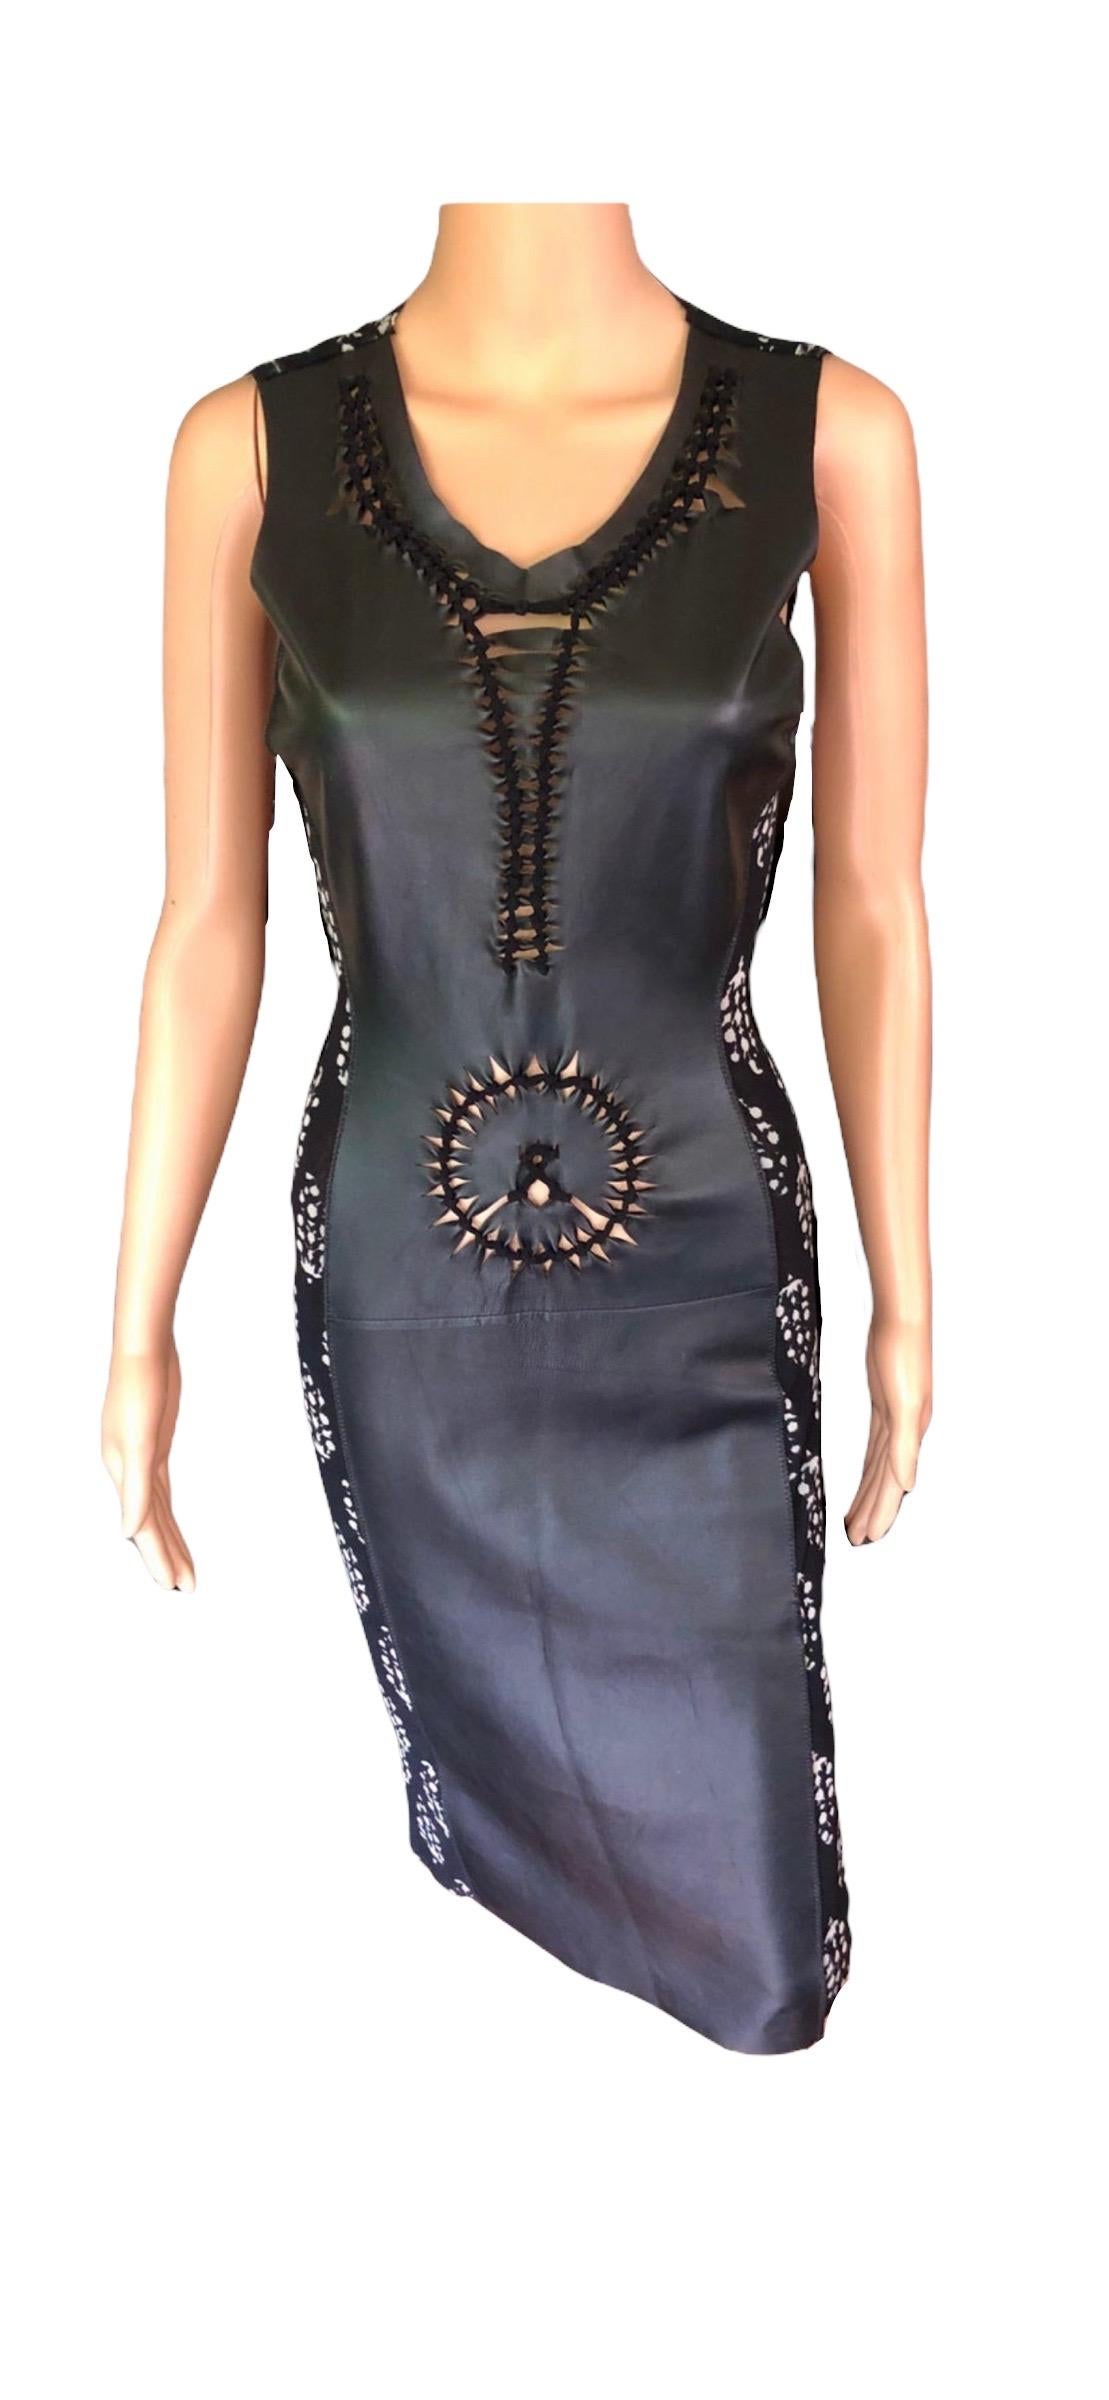 Jean Paul Gaultier Soleil Cutout Leather Mesh Bodycon Dress In Excellent Condition For Sale In Naples, FL